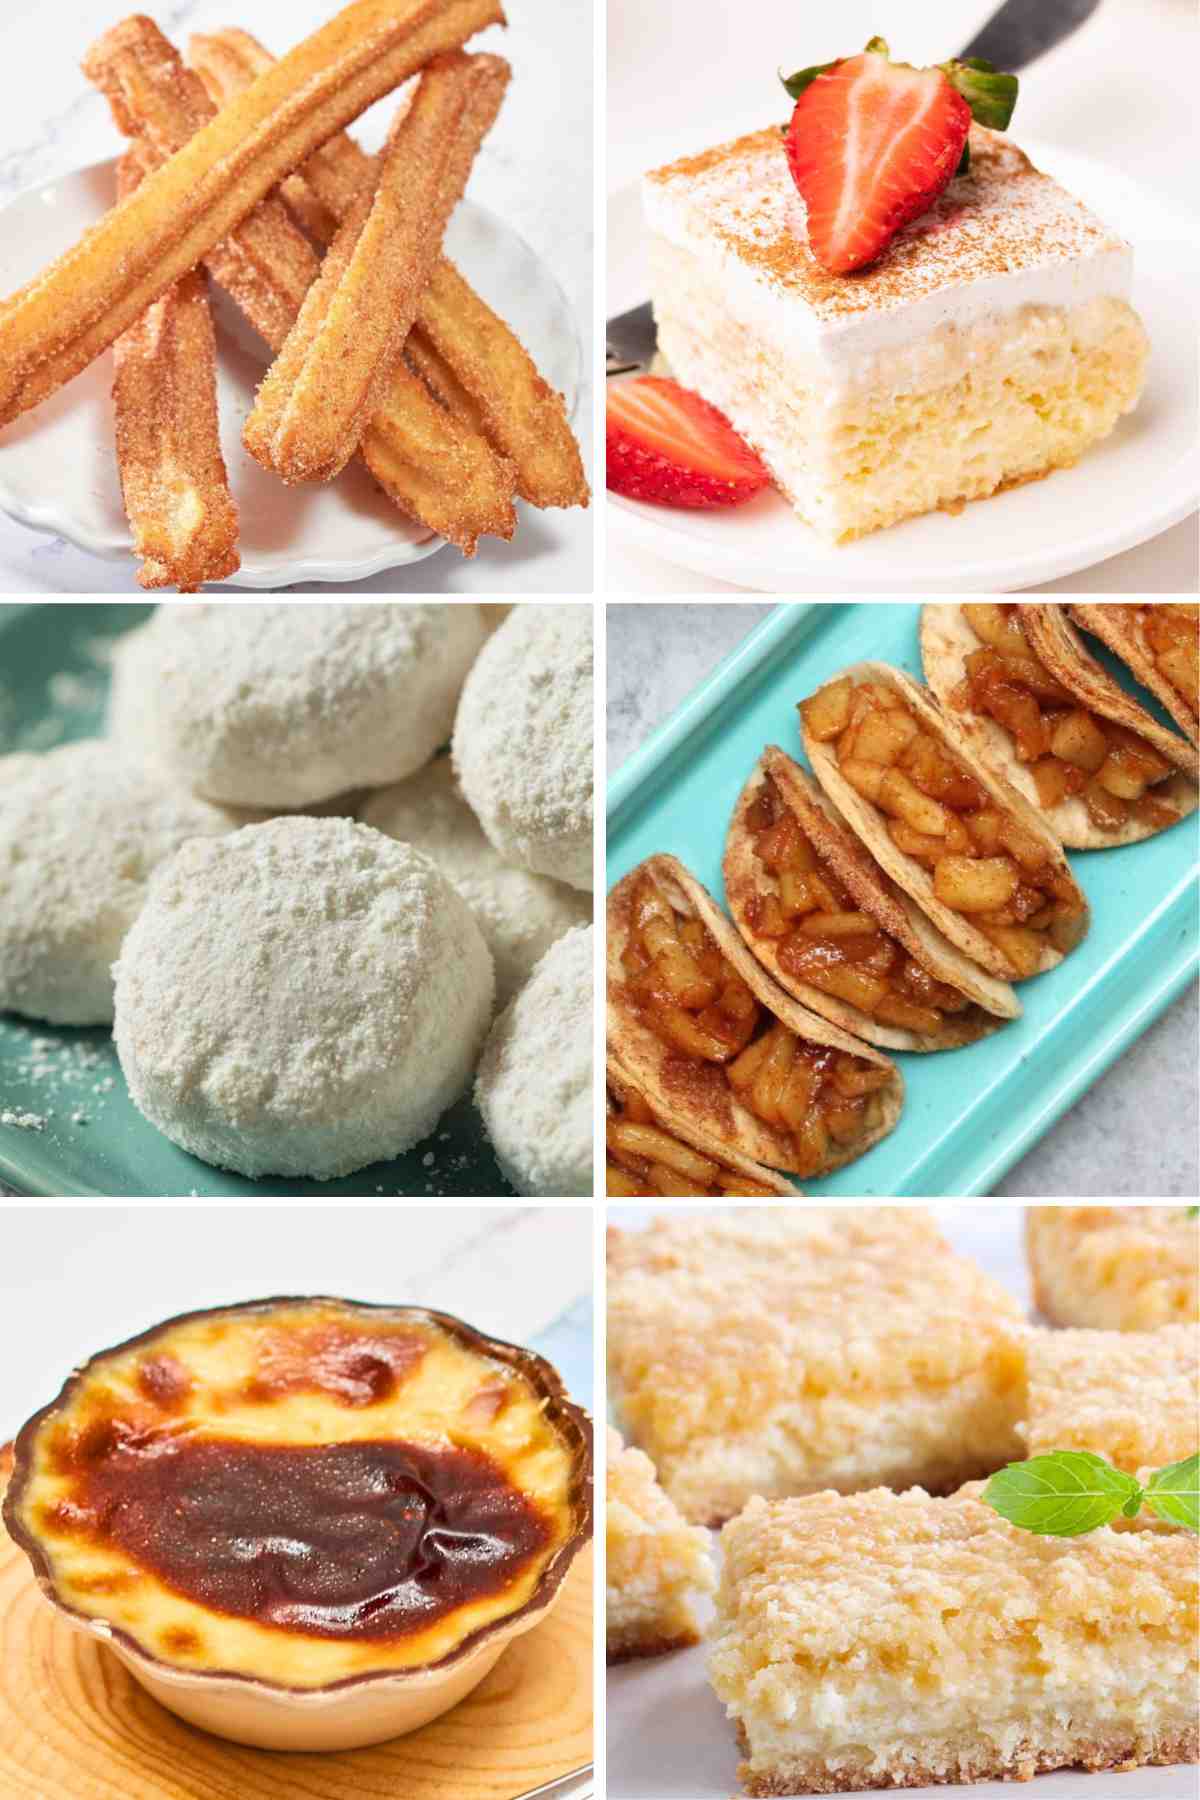 Best authentic Mexican Desserts all in one place! Warmed up, cooled down and everything in between – comer hasta (eat up)! You have likely heard of churros, but what about Fried Ice Cream or Rumchata Cakes? Or how about Apple Pie Tacos?